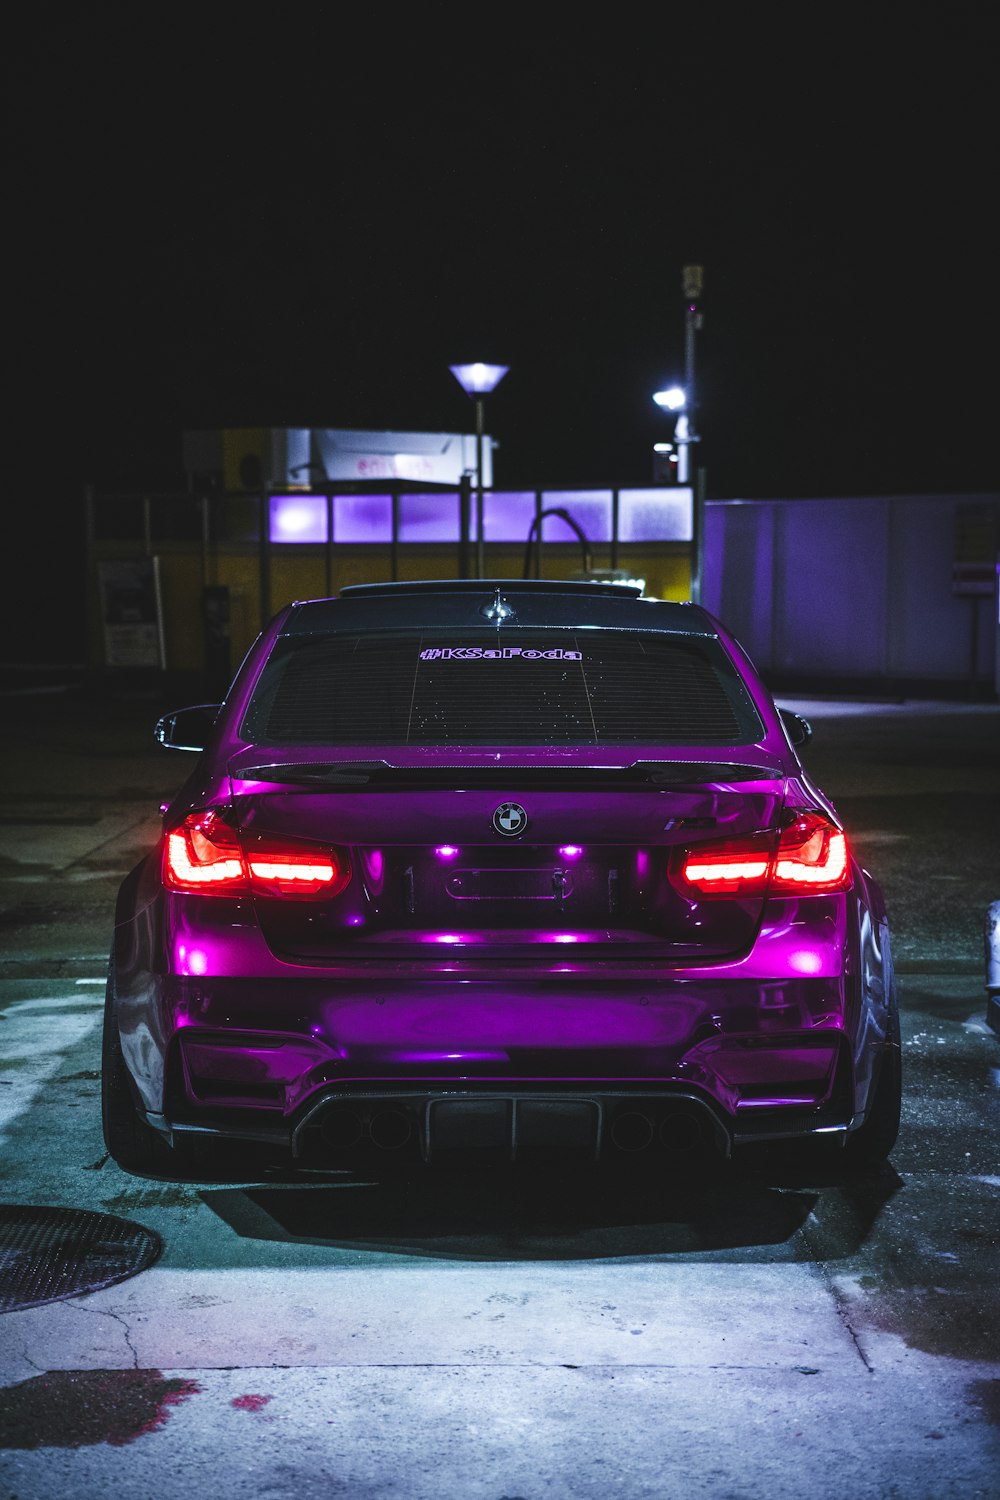 a car parked in a parking lot at night